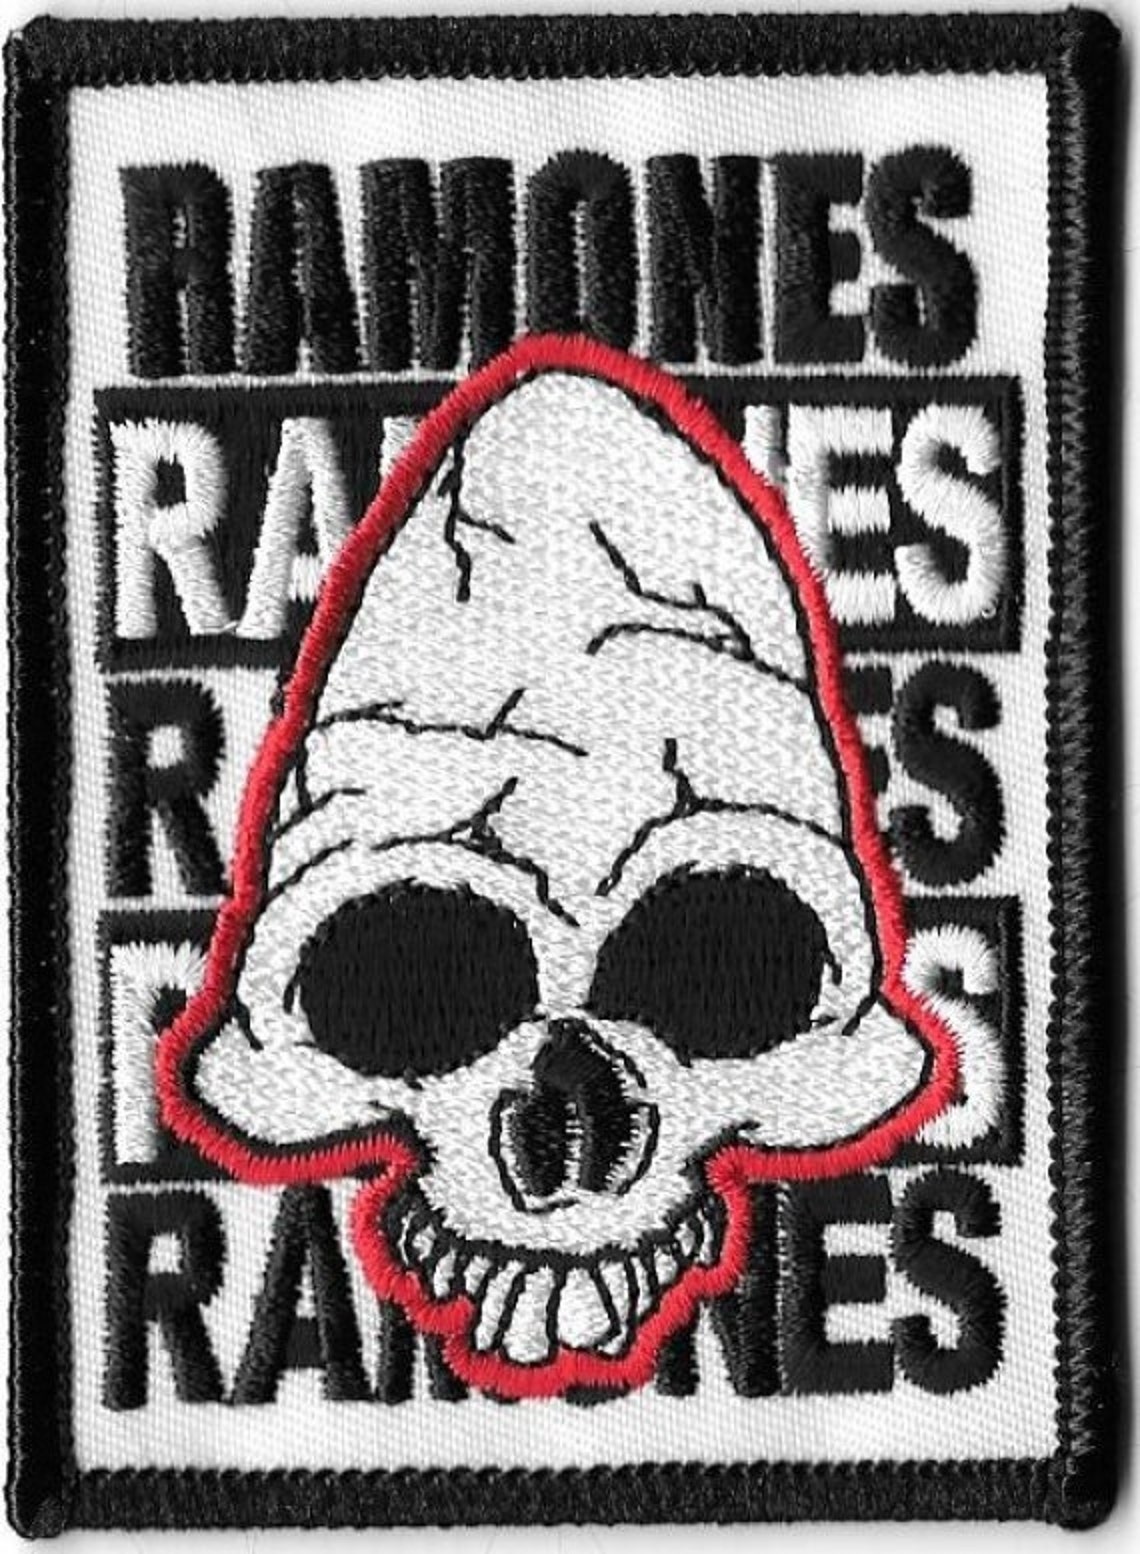 Ramones Pinhead Skull Logo Embroidered Patch / Iron On | Etsy